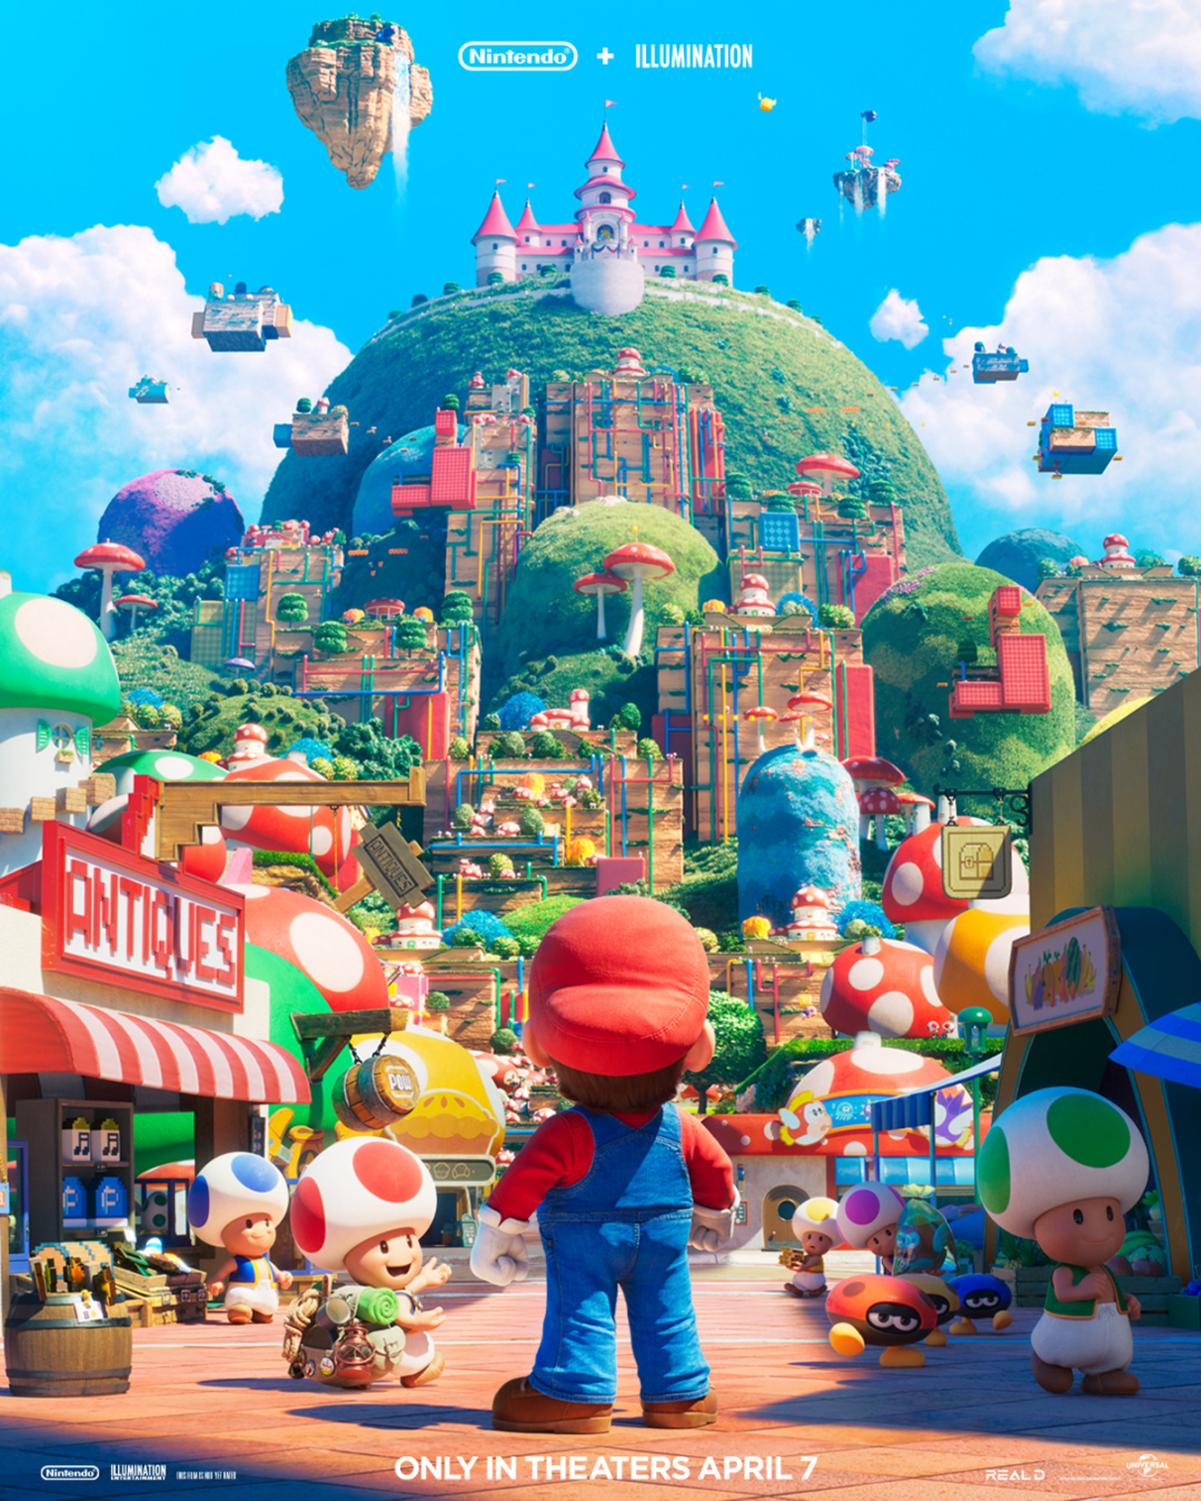 Super Mario Movie Review: Nintendo's Latest Film Disappoints